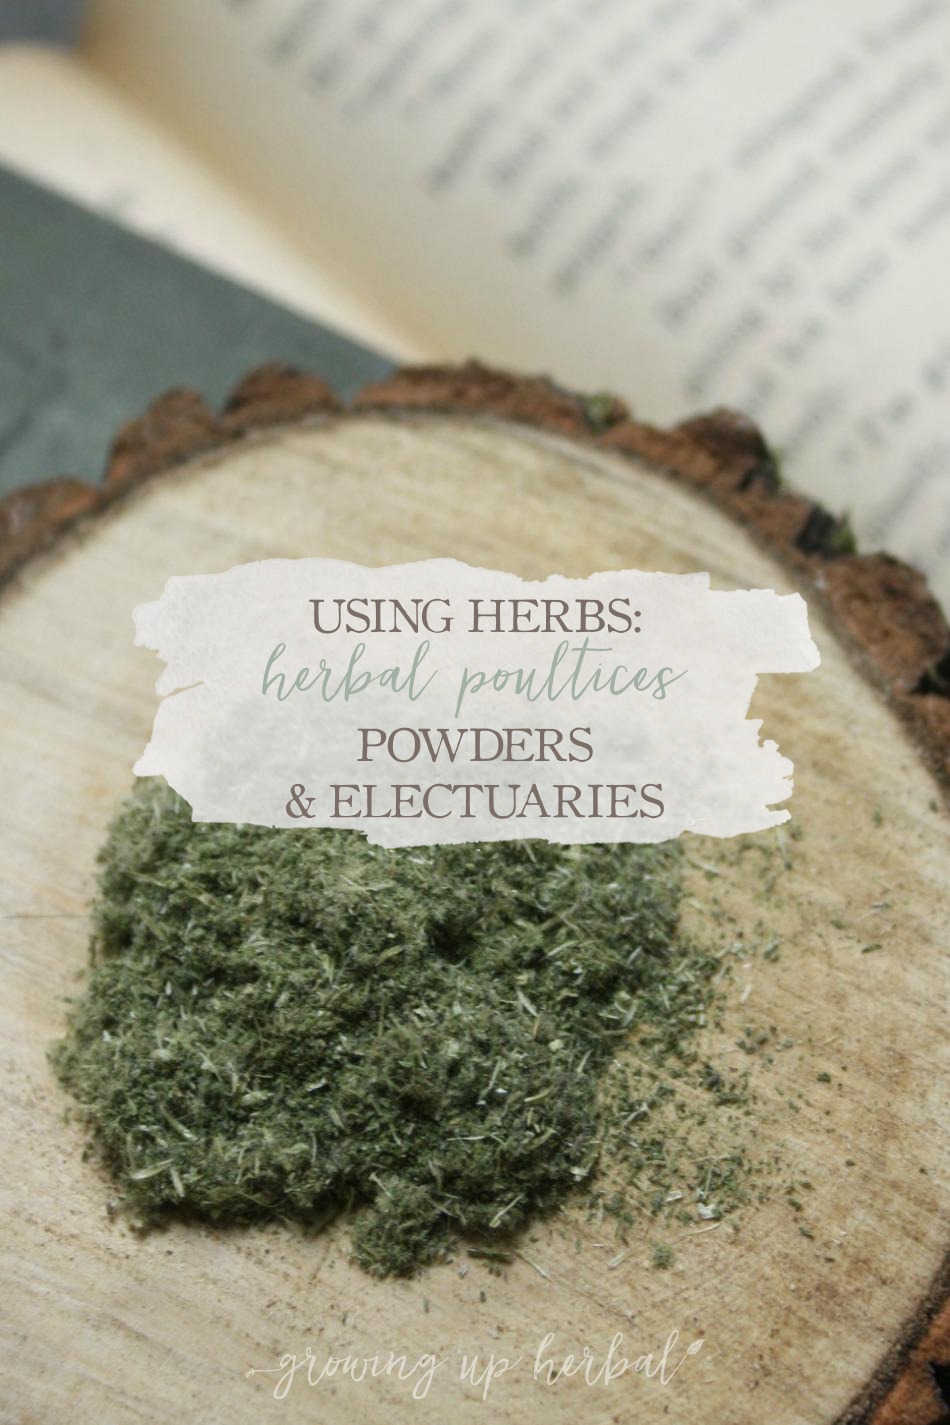 Using Herbs: Herbal Poultices, Powders, and Electuaries | Growing Up Herbal | Learn how to make and use herbal poultices, powders, and electuaries in today's Using Herbs lesson!